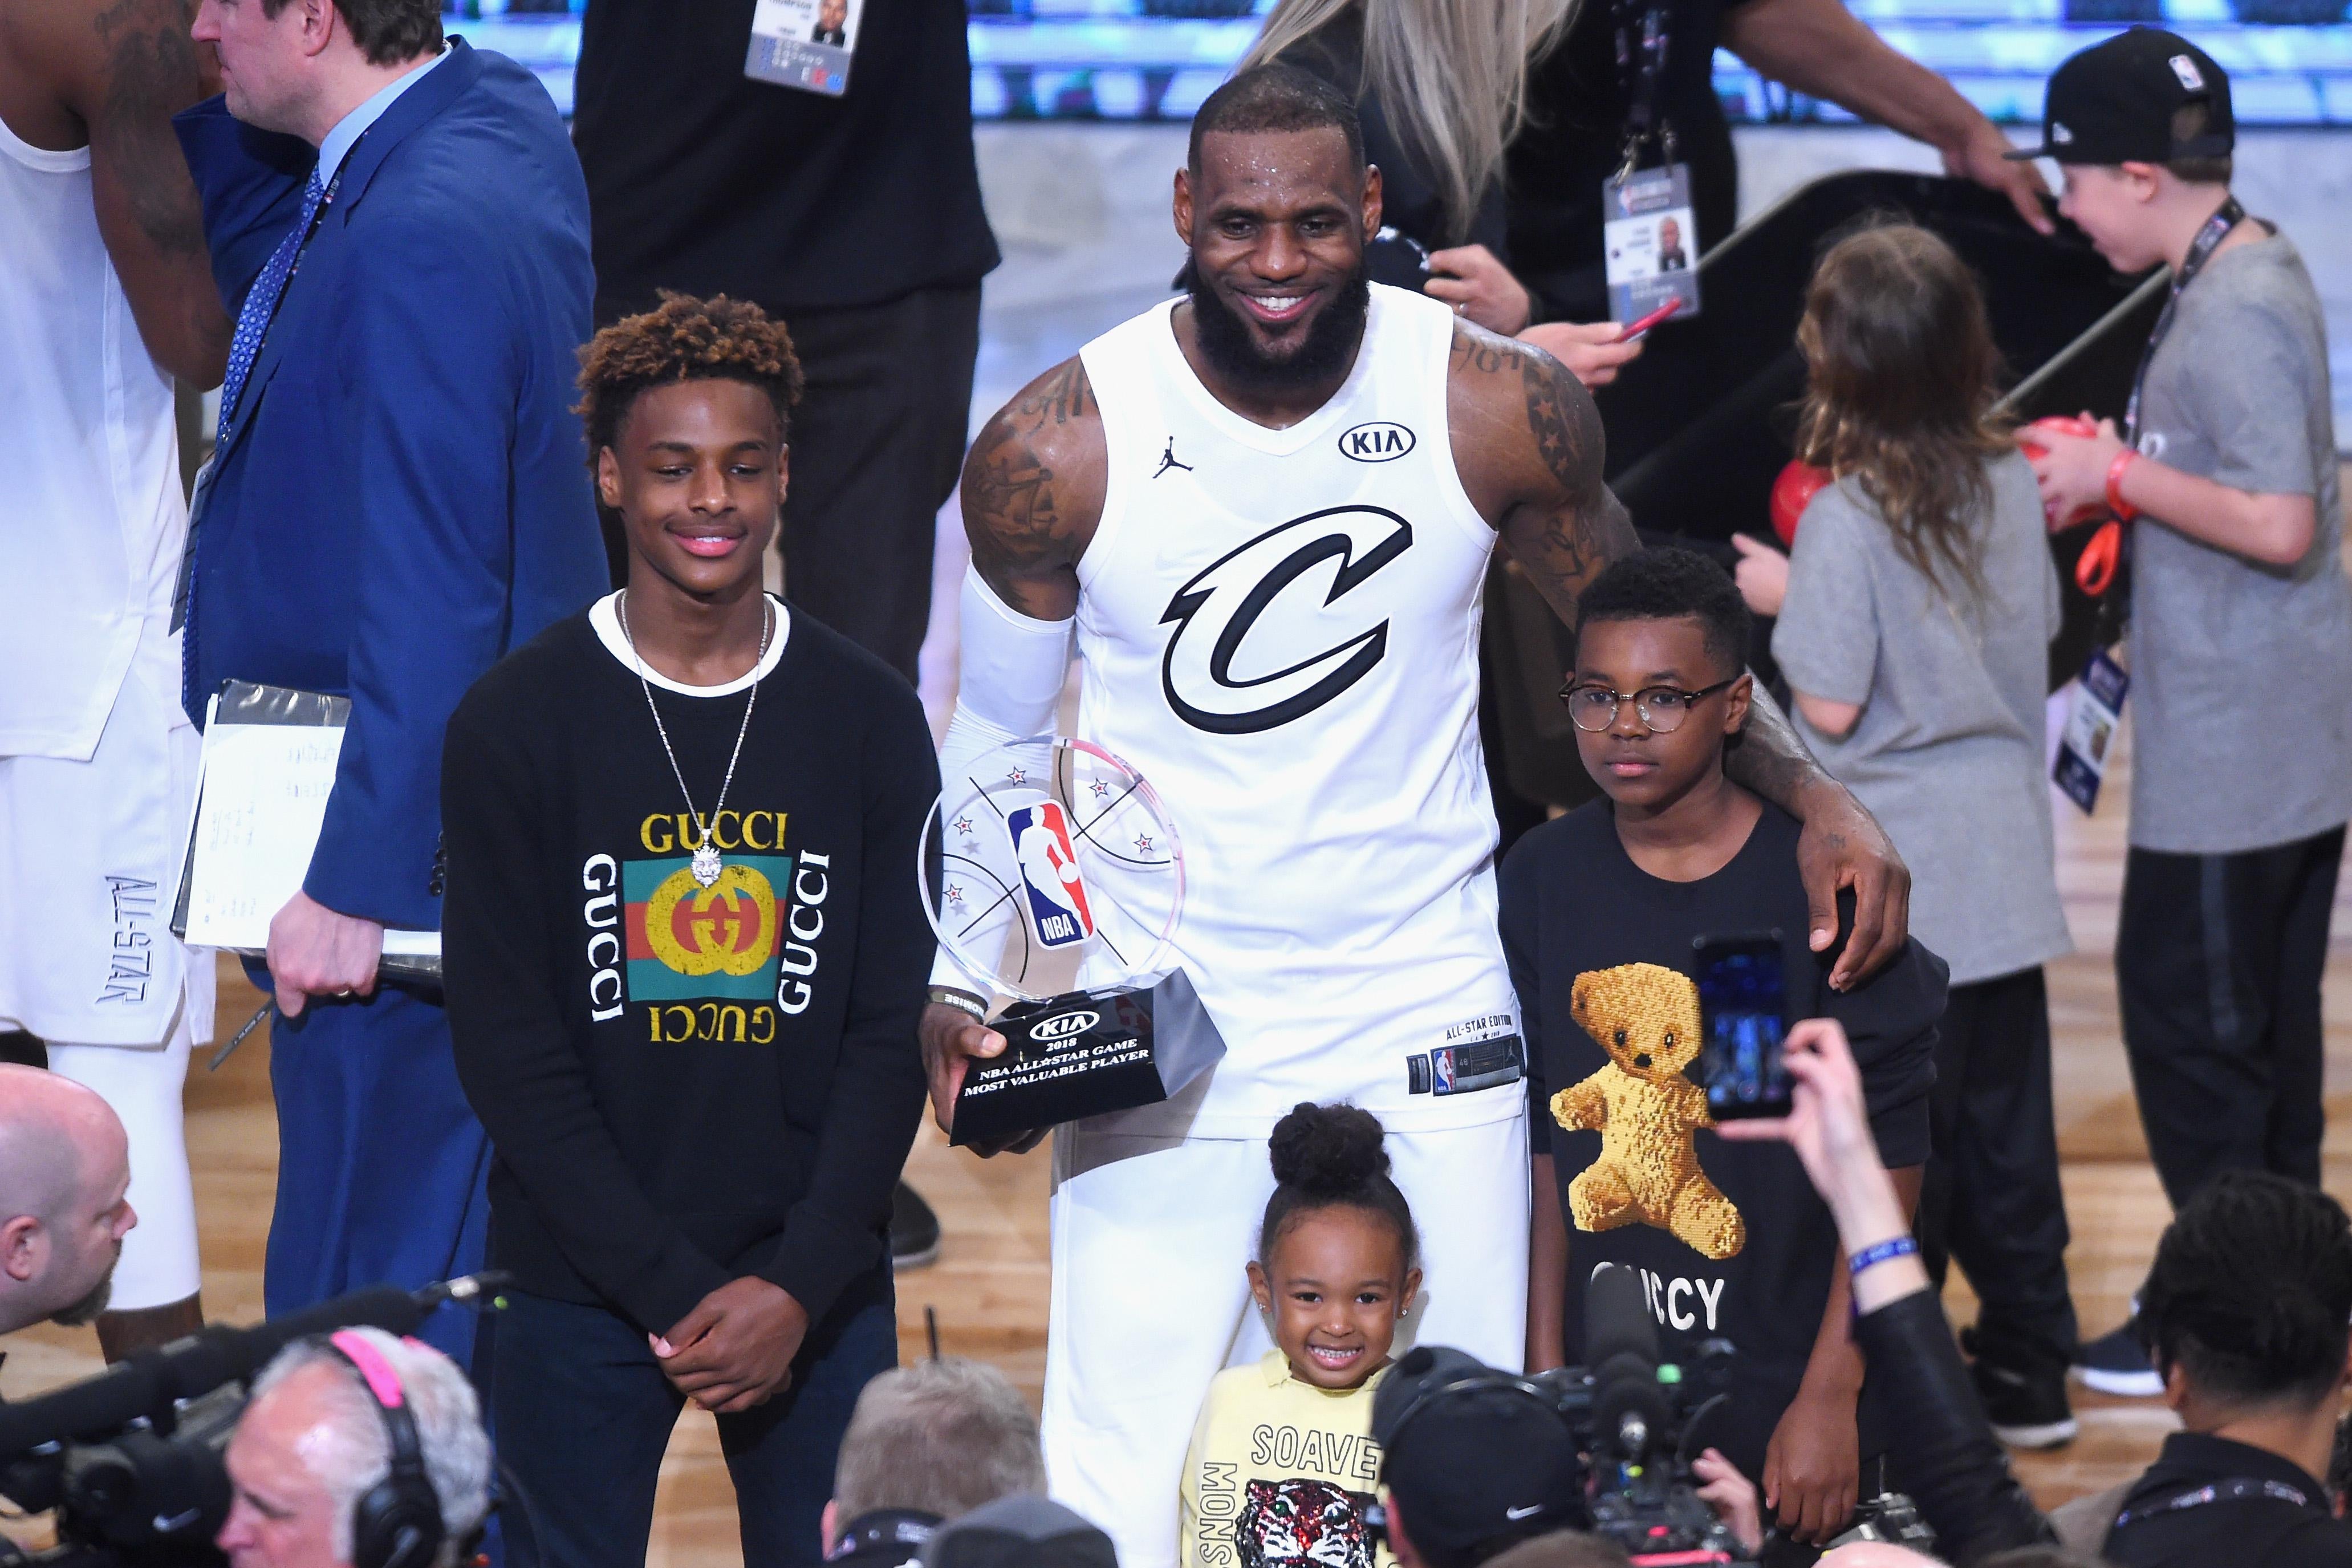 LeBron James Jr., LeBron James, Zhuri James, and Bryce Maximus James pose for a photo on the court after the All-Star Game.